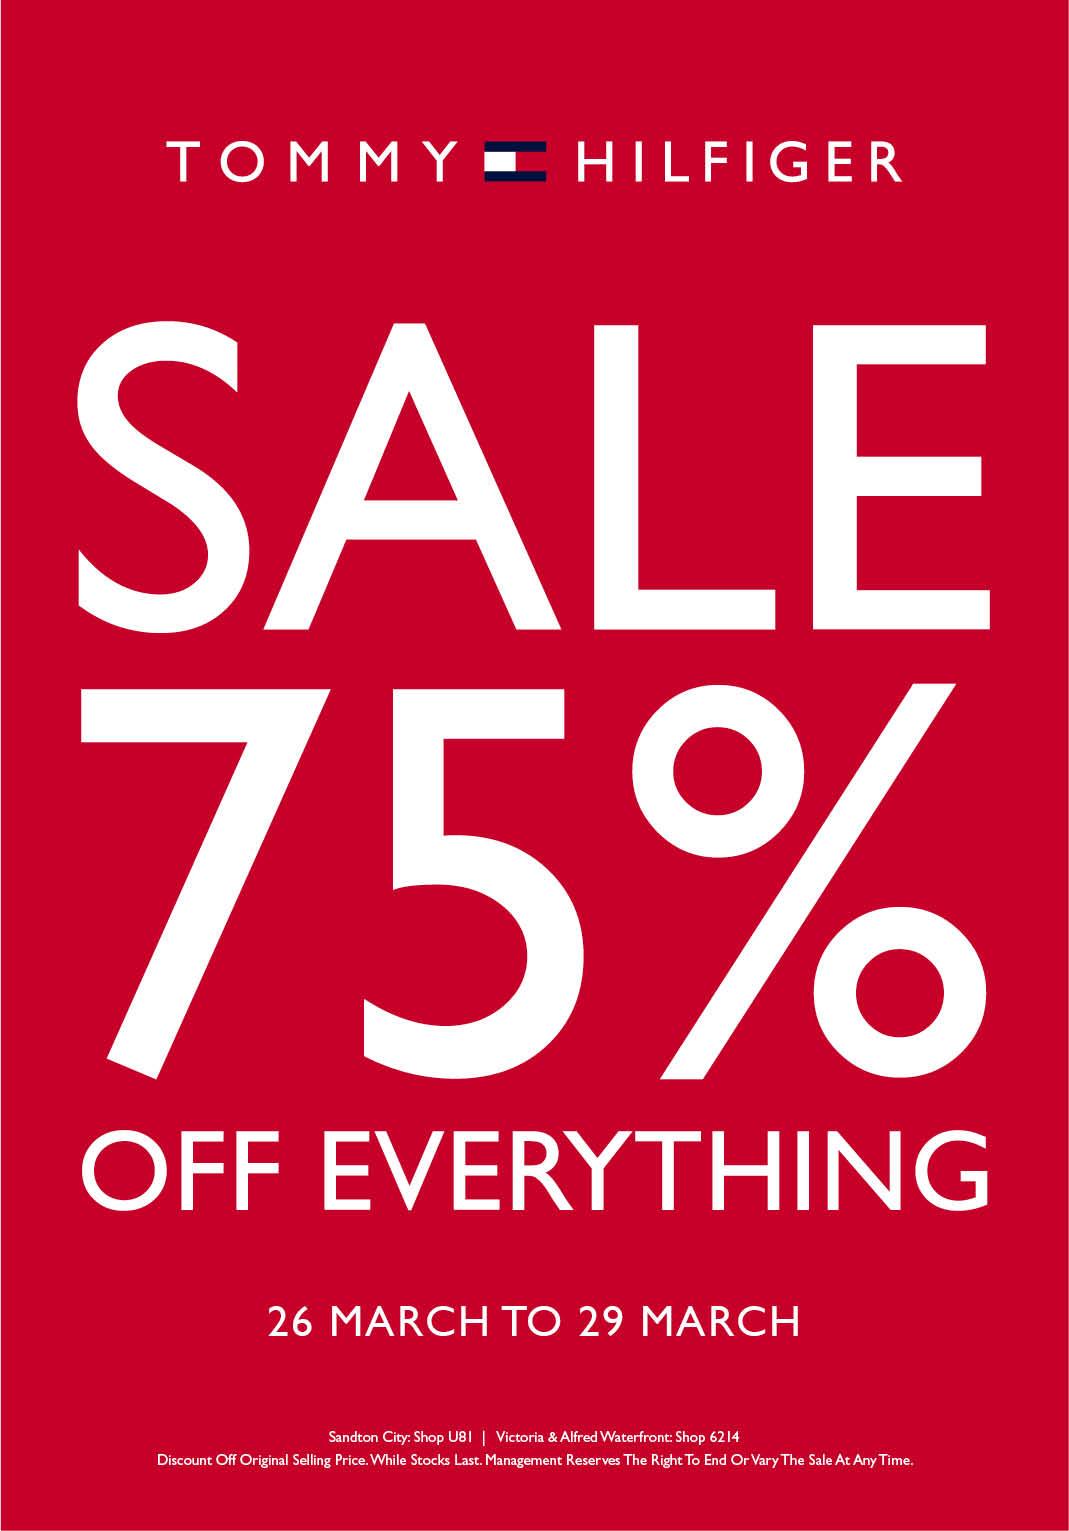 Sandton City on X: "The stand alone Tommy Hilfiger store is clearing ALL  stock at less 75% for four days! This is what we call a SALE!!  http://t.co/C0wJXCv35V" / X